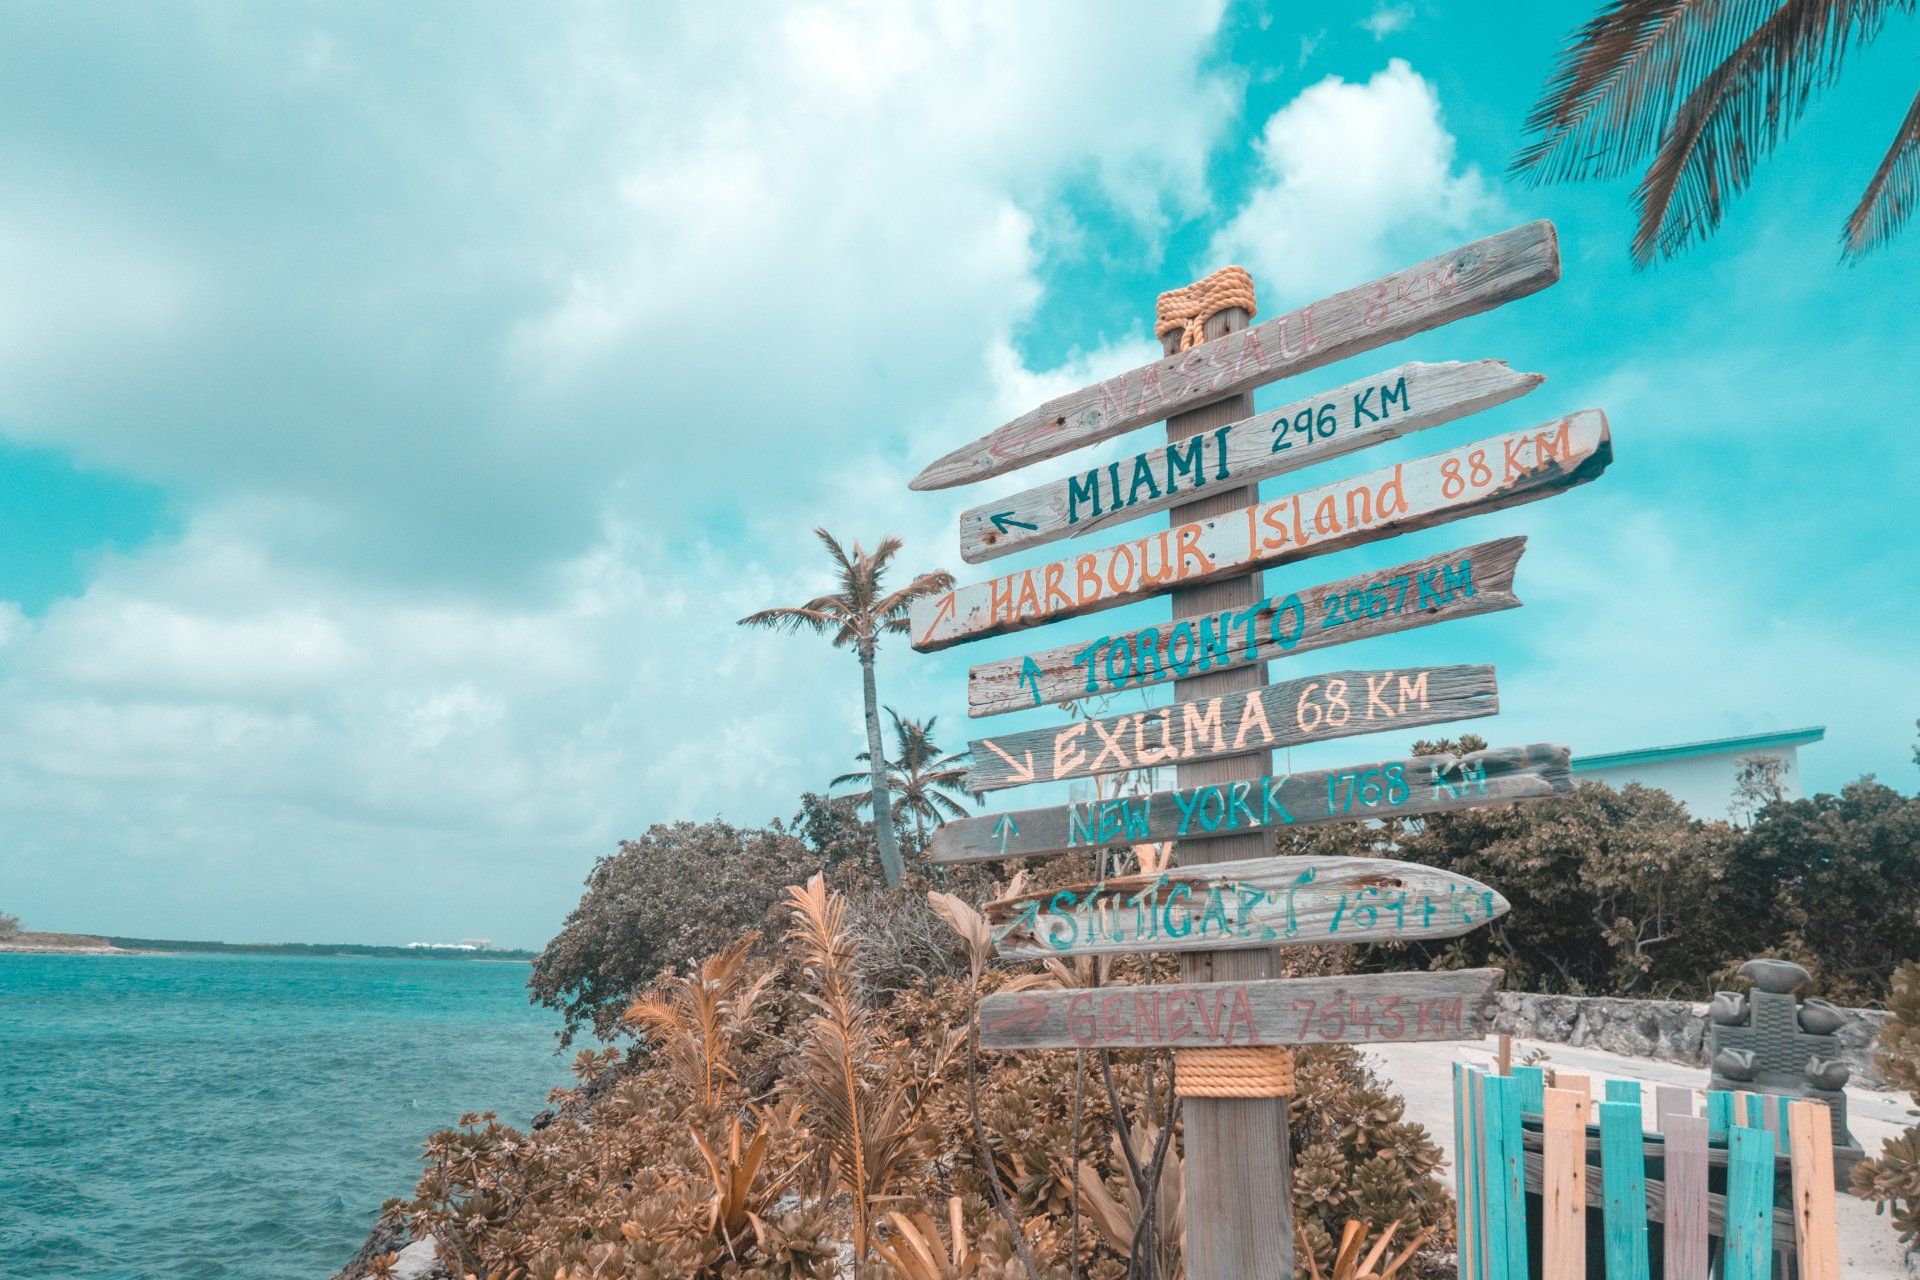 Photography shot by:Ed Gregory | Image of beach and sign posts